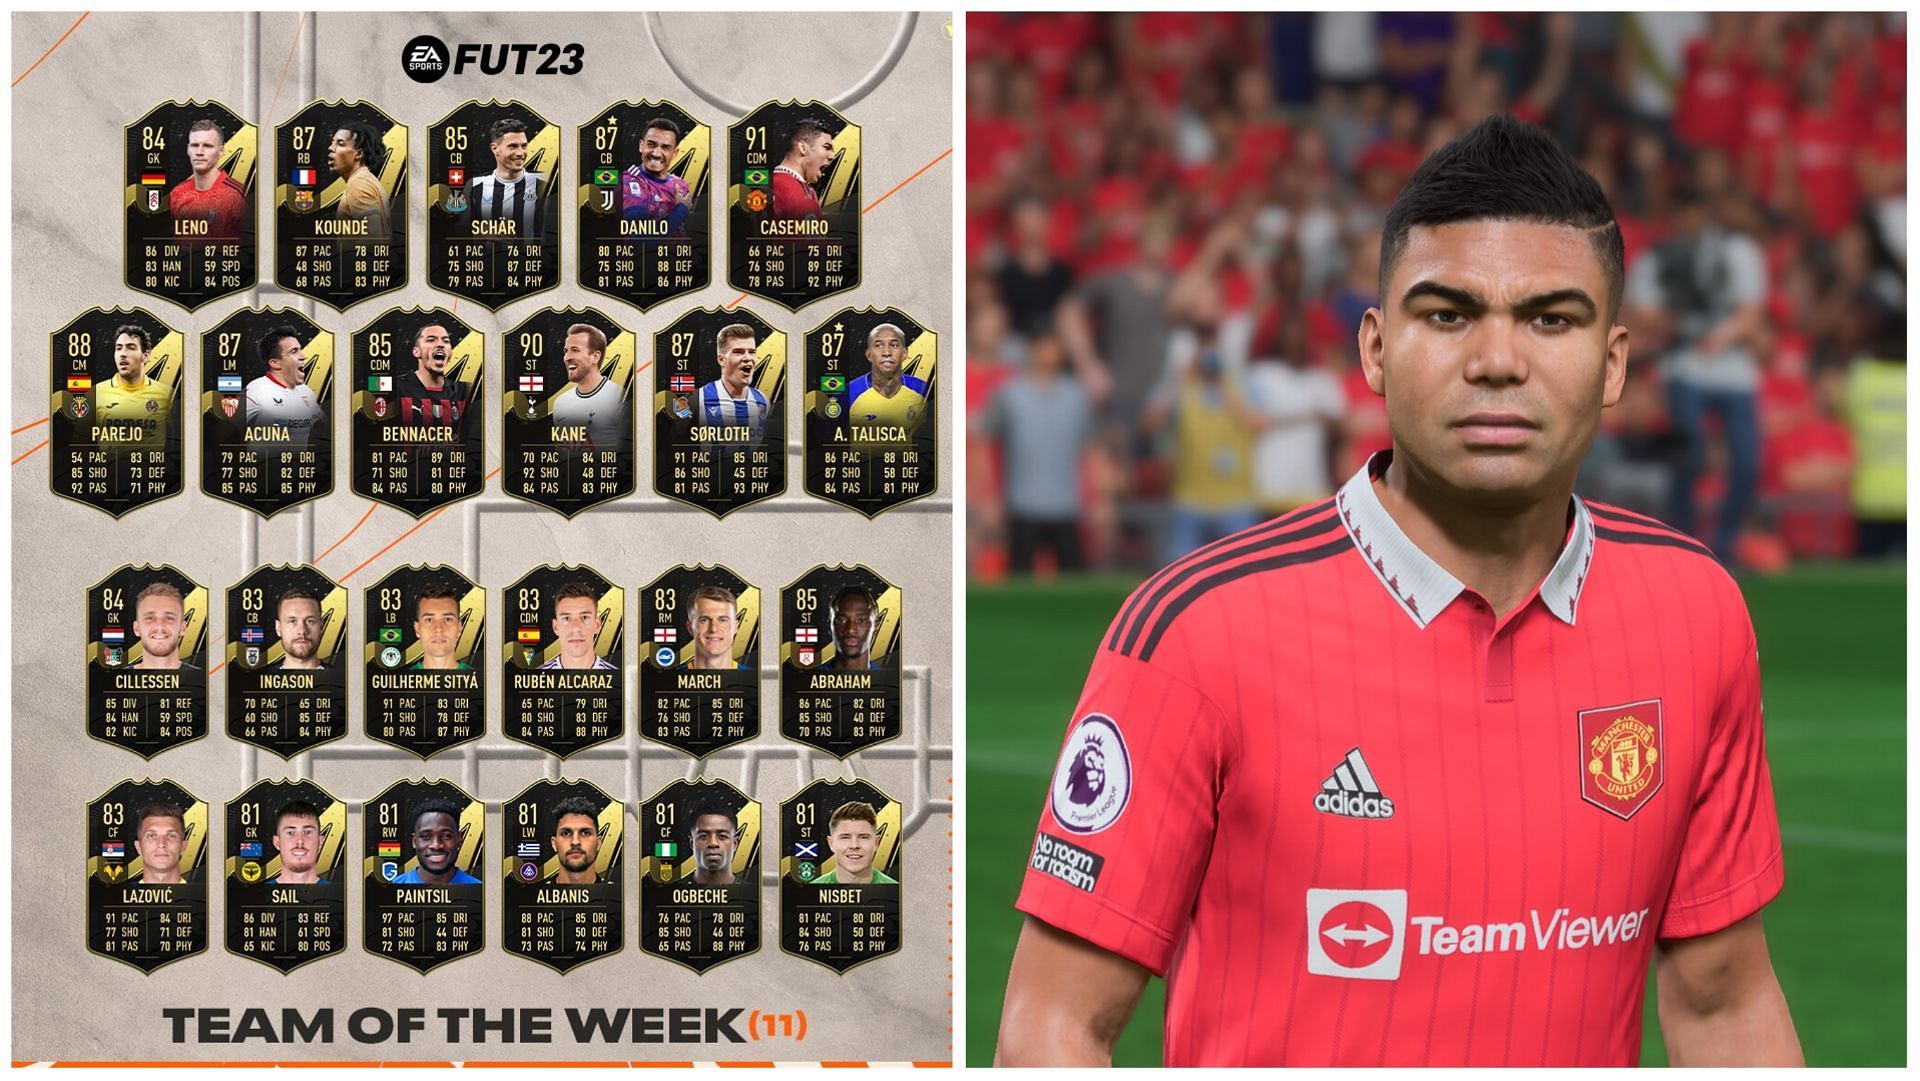 TOTW 11 is live in FIFA 23 (Images via EA Sports)